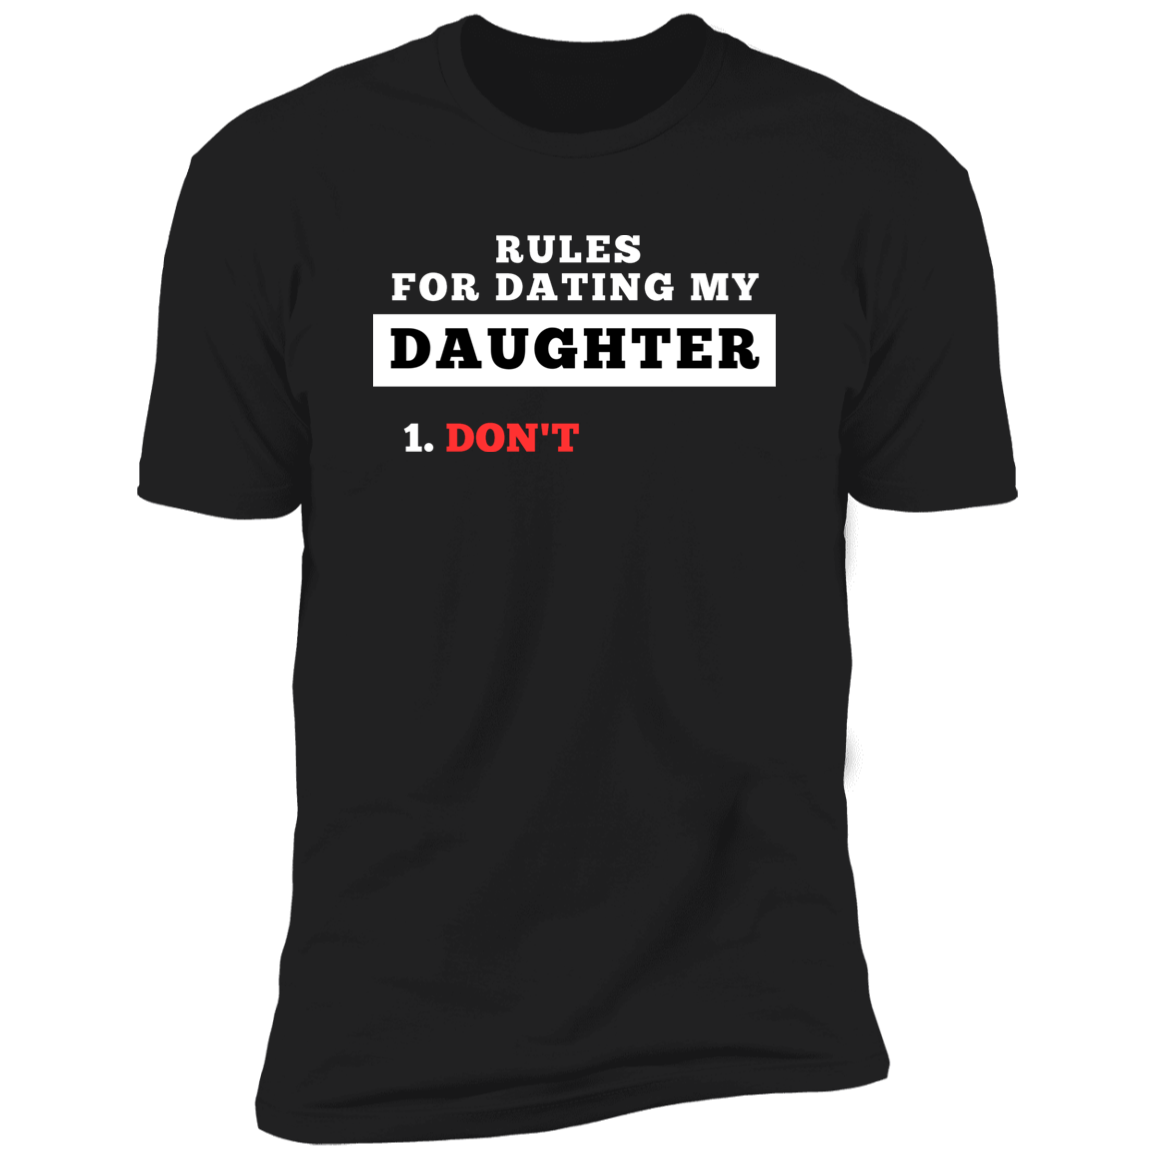 Rules For Dating My Daughter (T-Shirt)